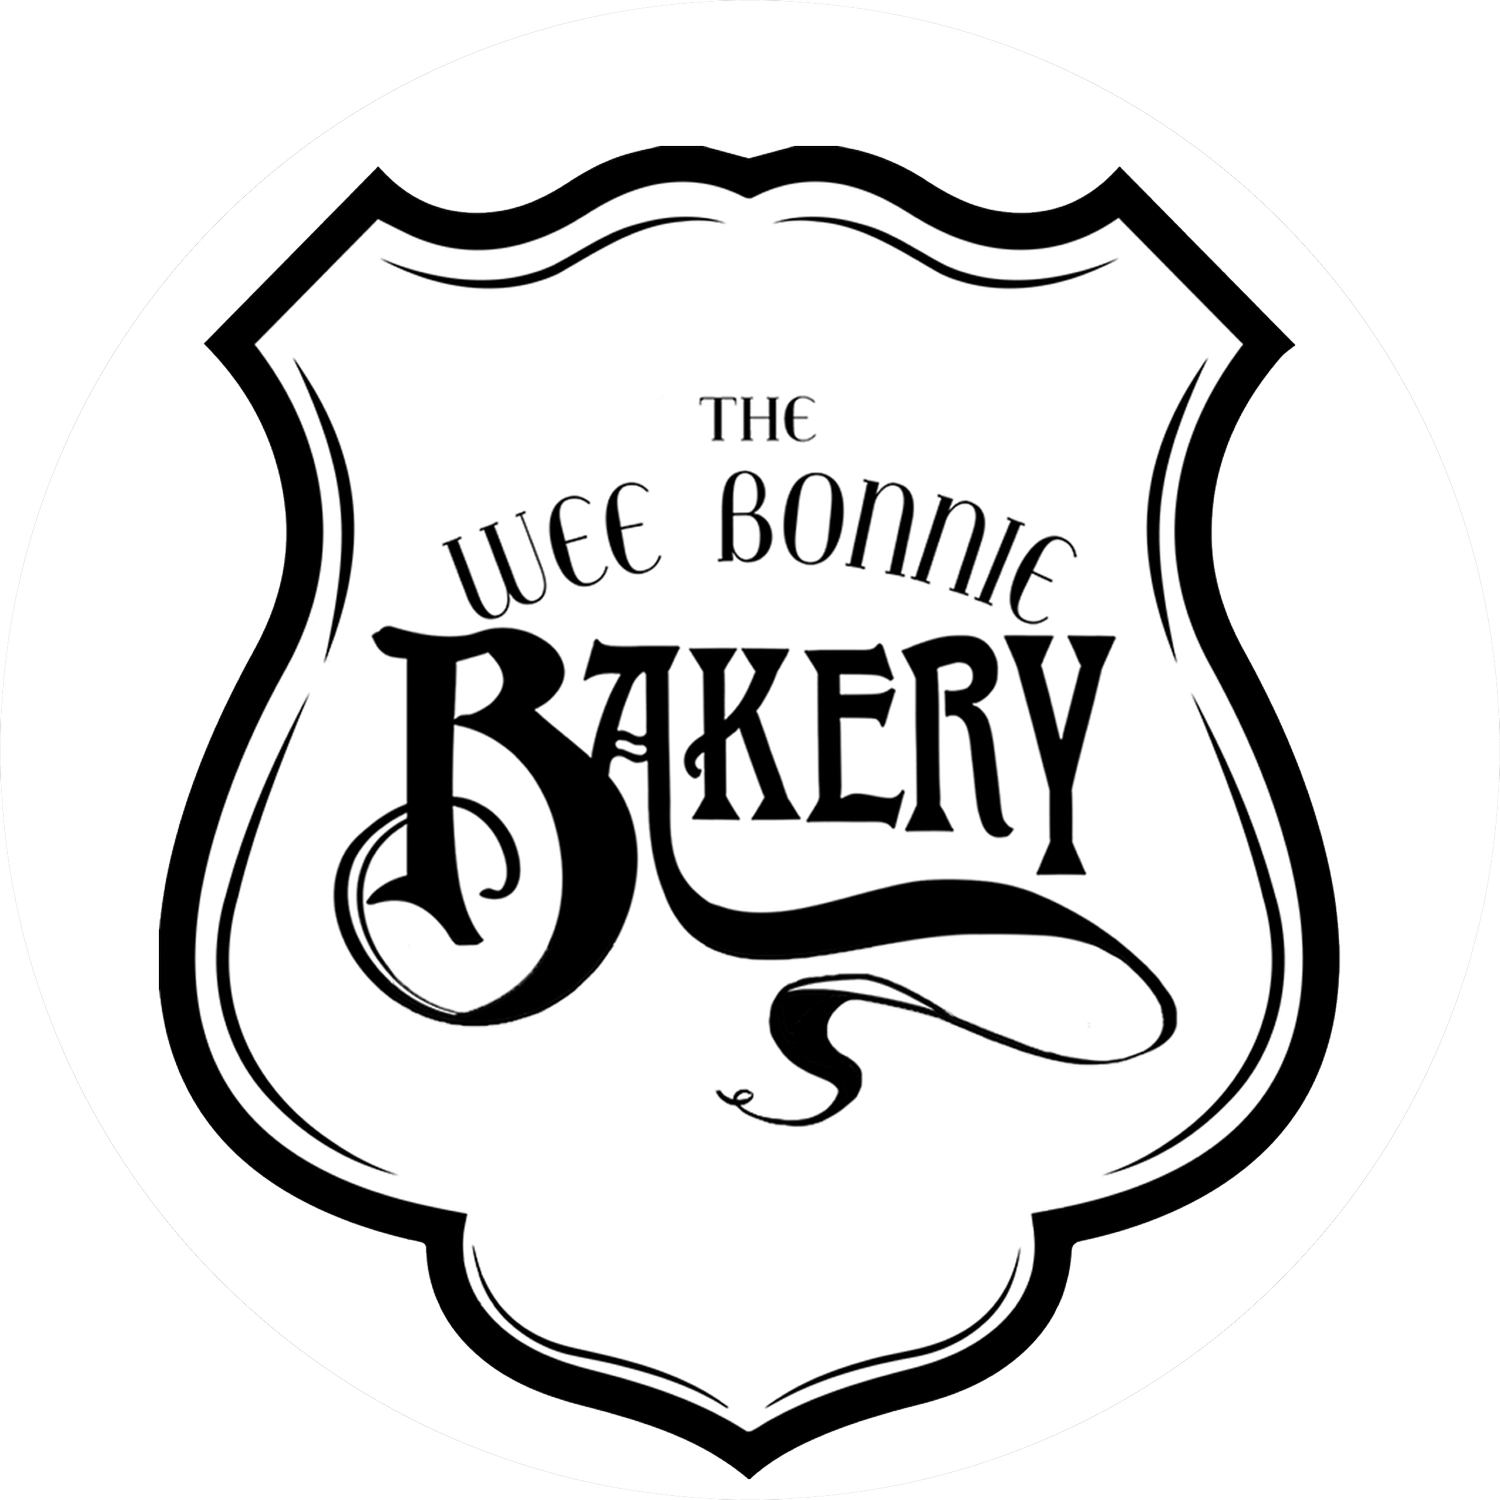 The Wee Bonnie Bakery